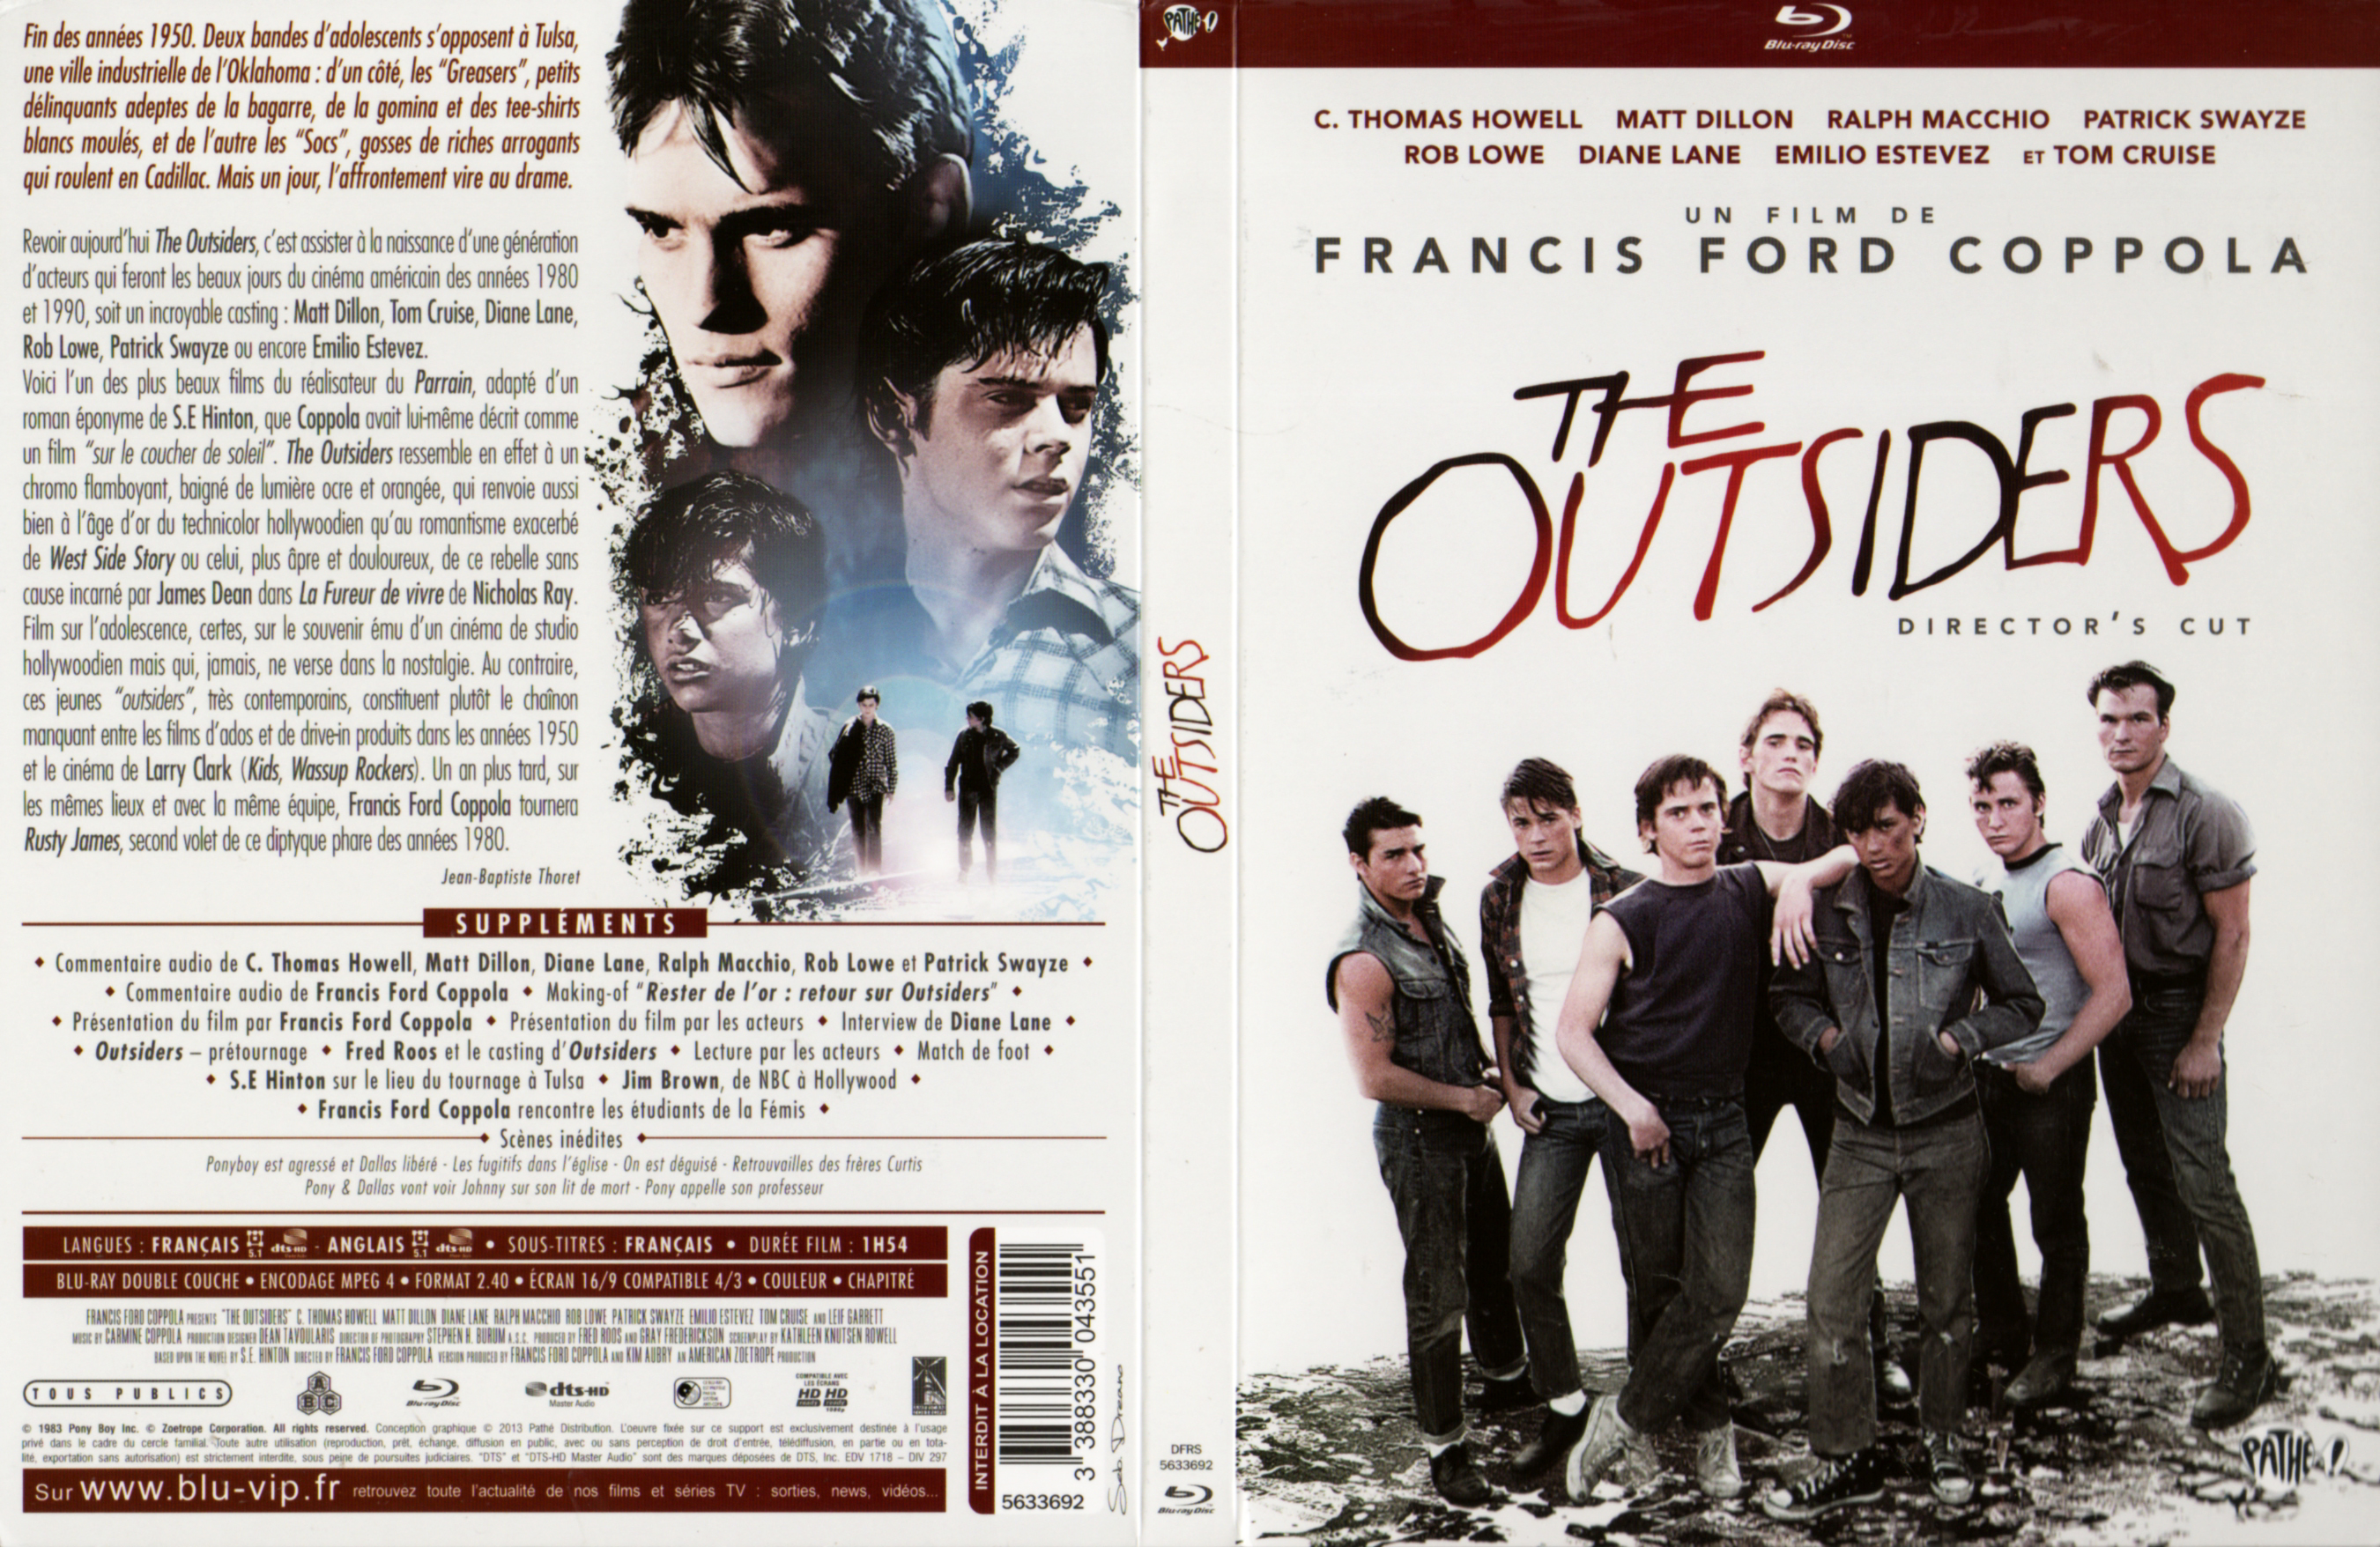 Jaquette DVD The outsiders (BLU-RAY)